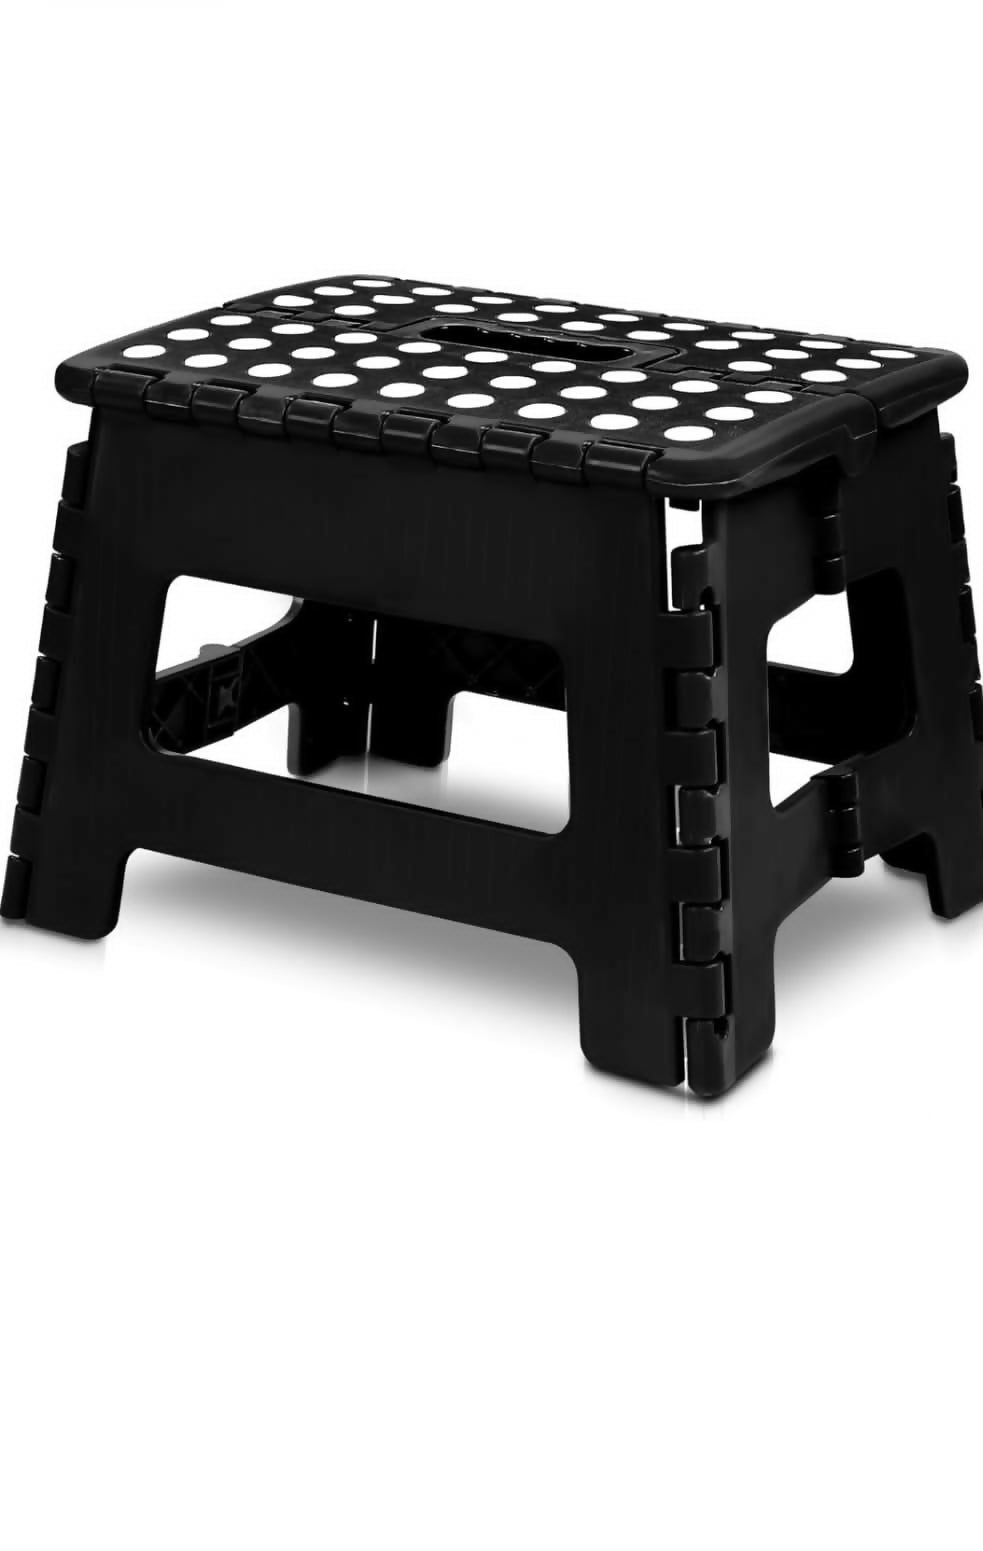 n Plastic Portable Collapsible Folding Small Step Stool Fold Chair 200 Pounds For Adults And Kids